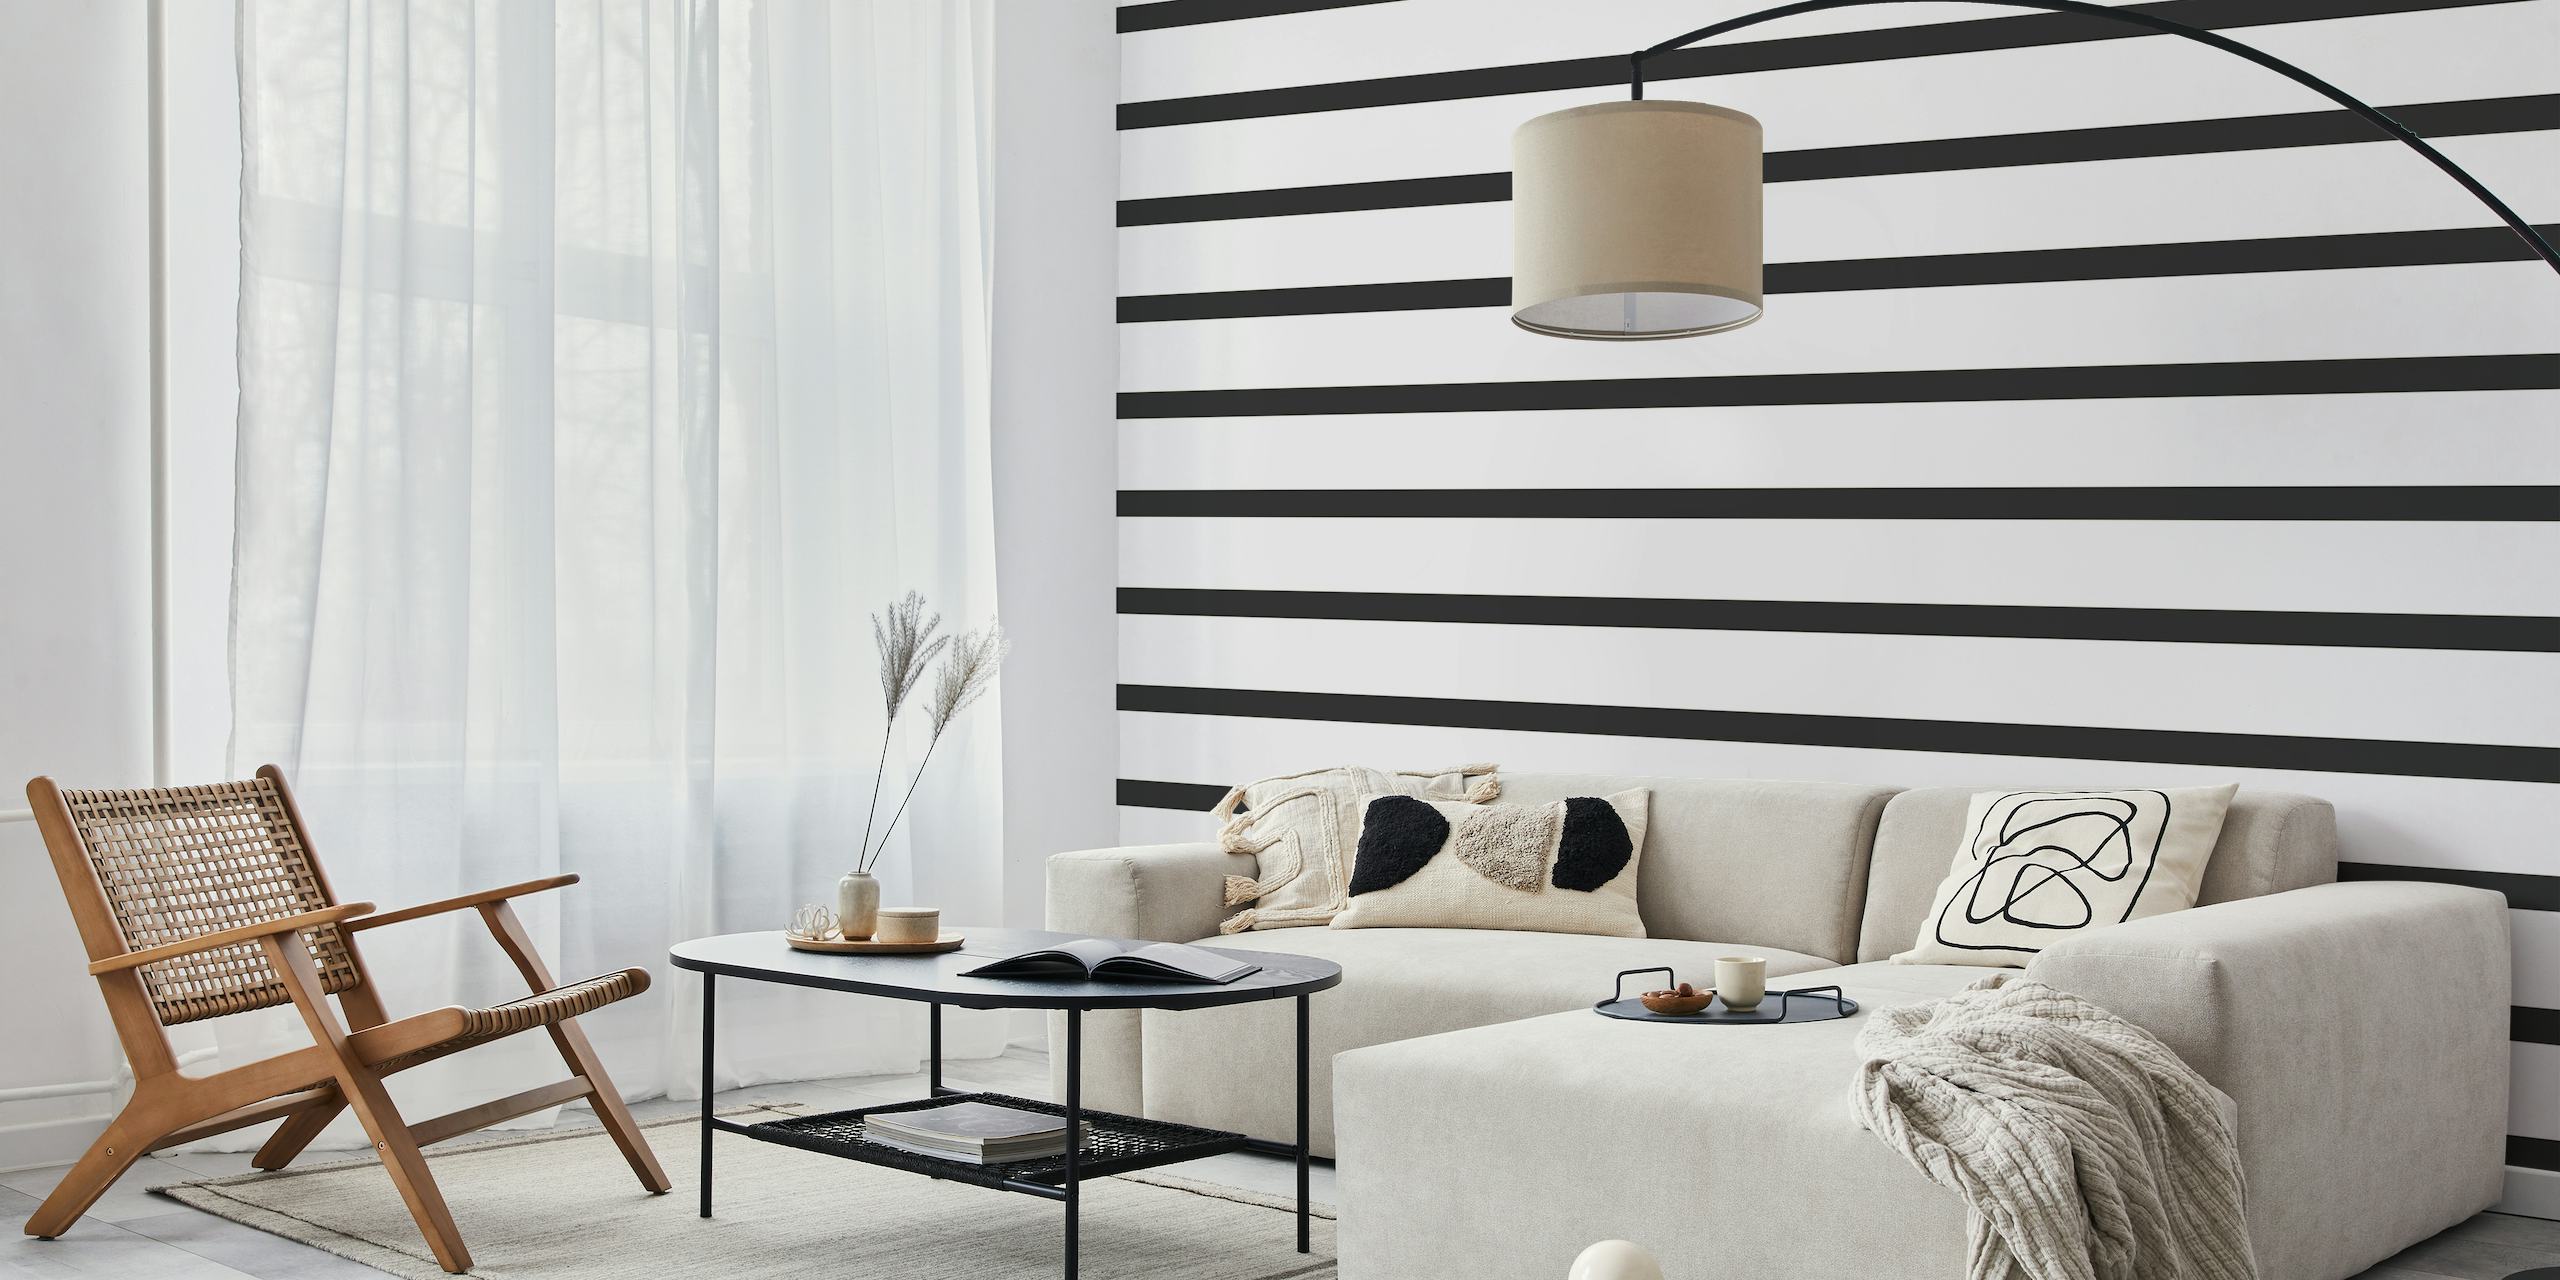 Black and white striped wall mural design